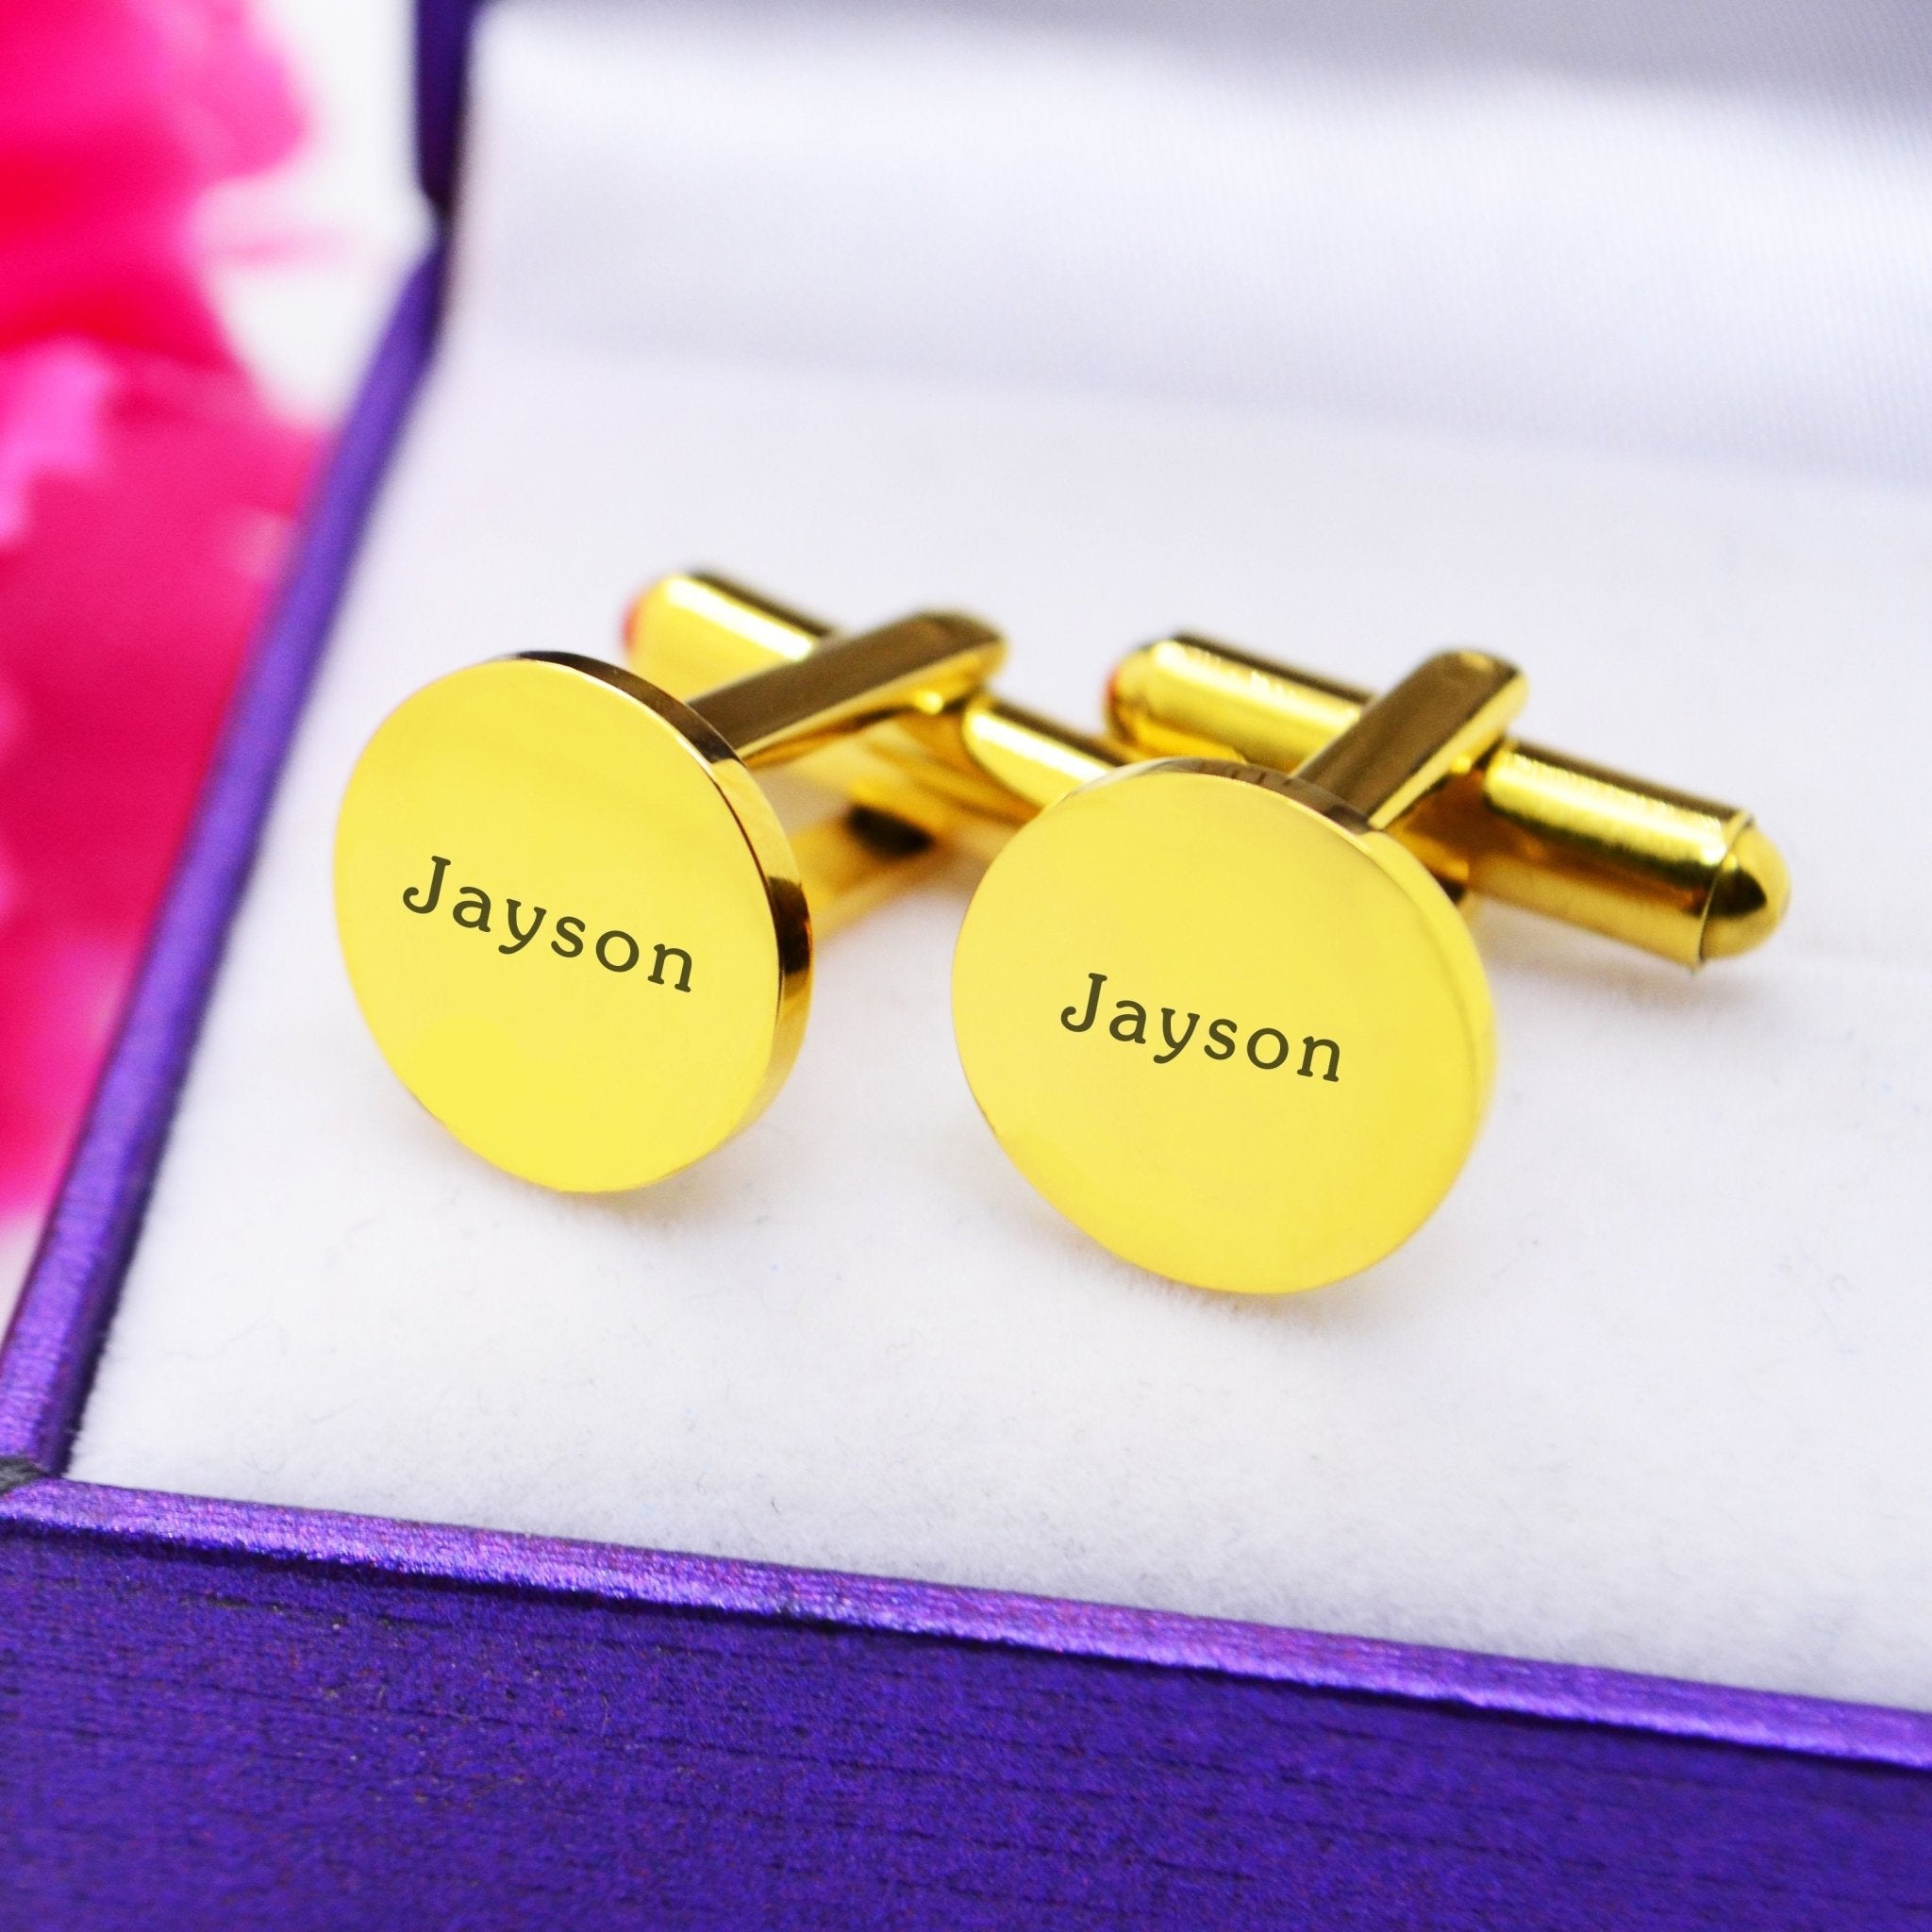 Personalised Round Cufflinks - Mens Jewellery by Belle Fever